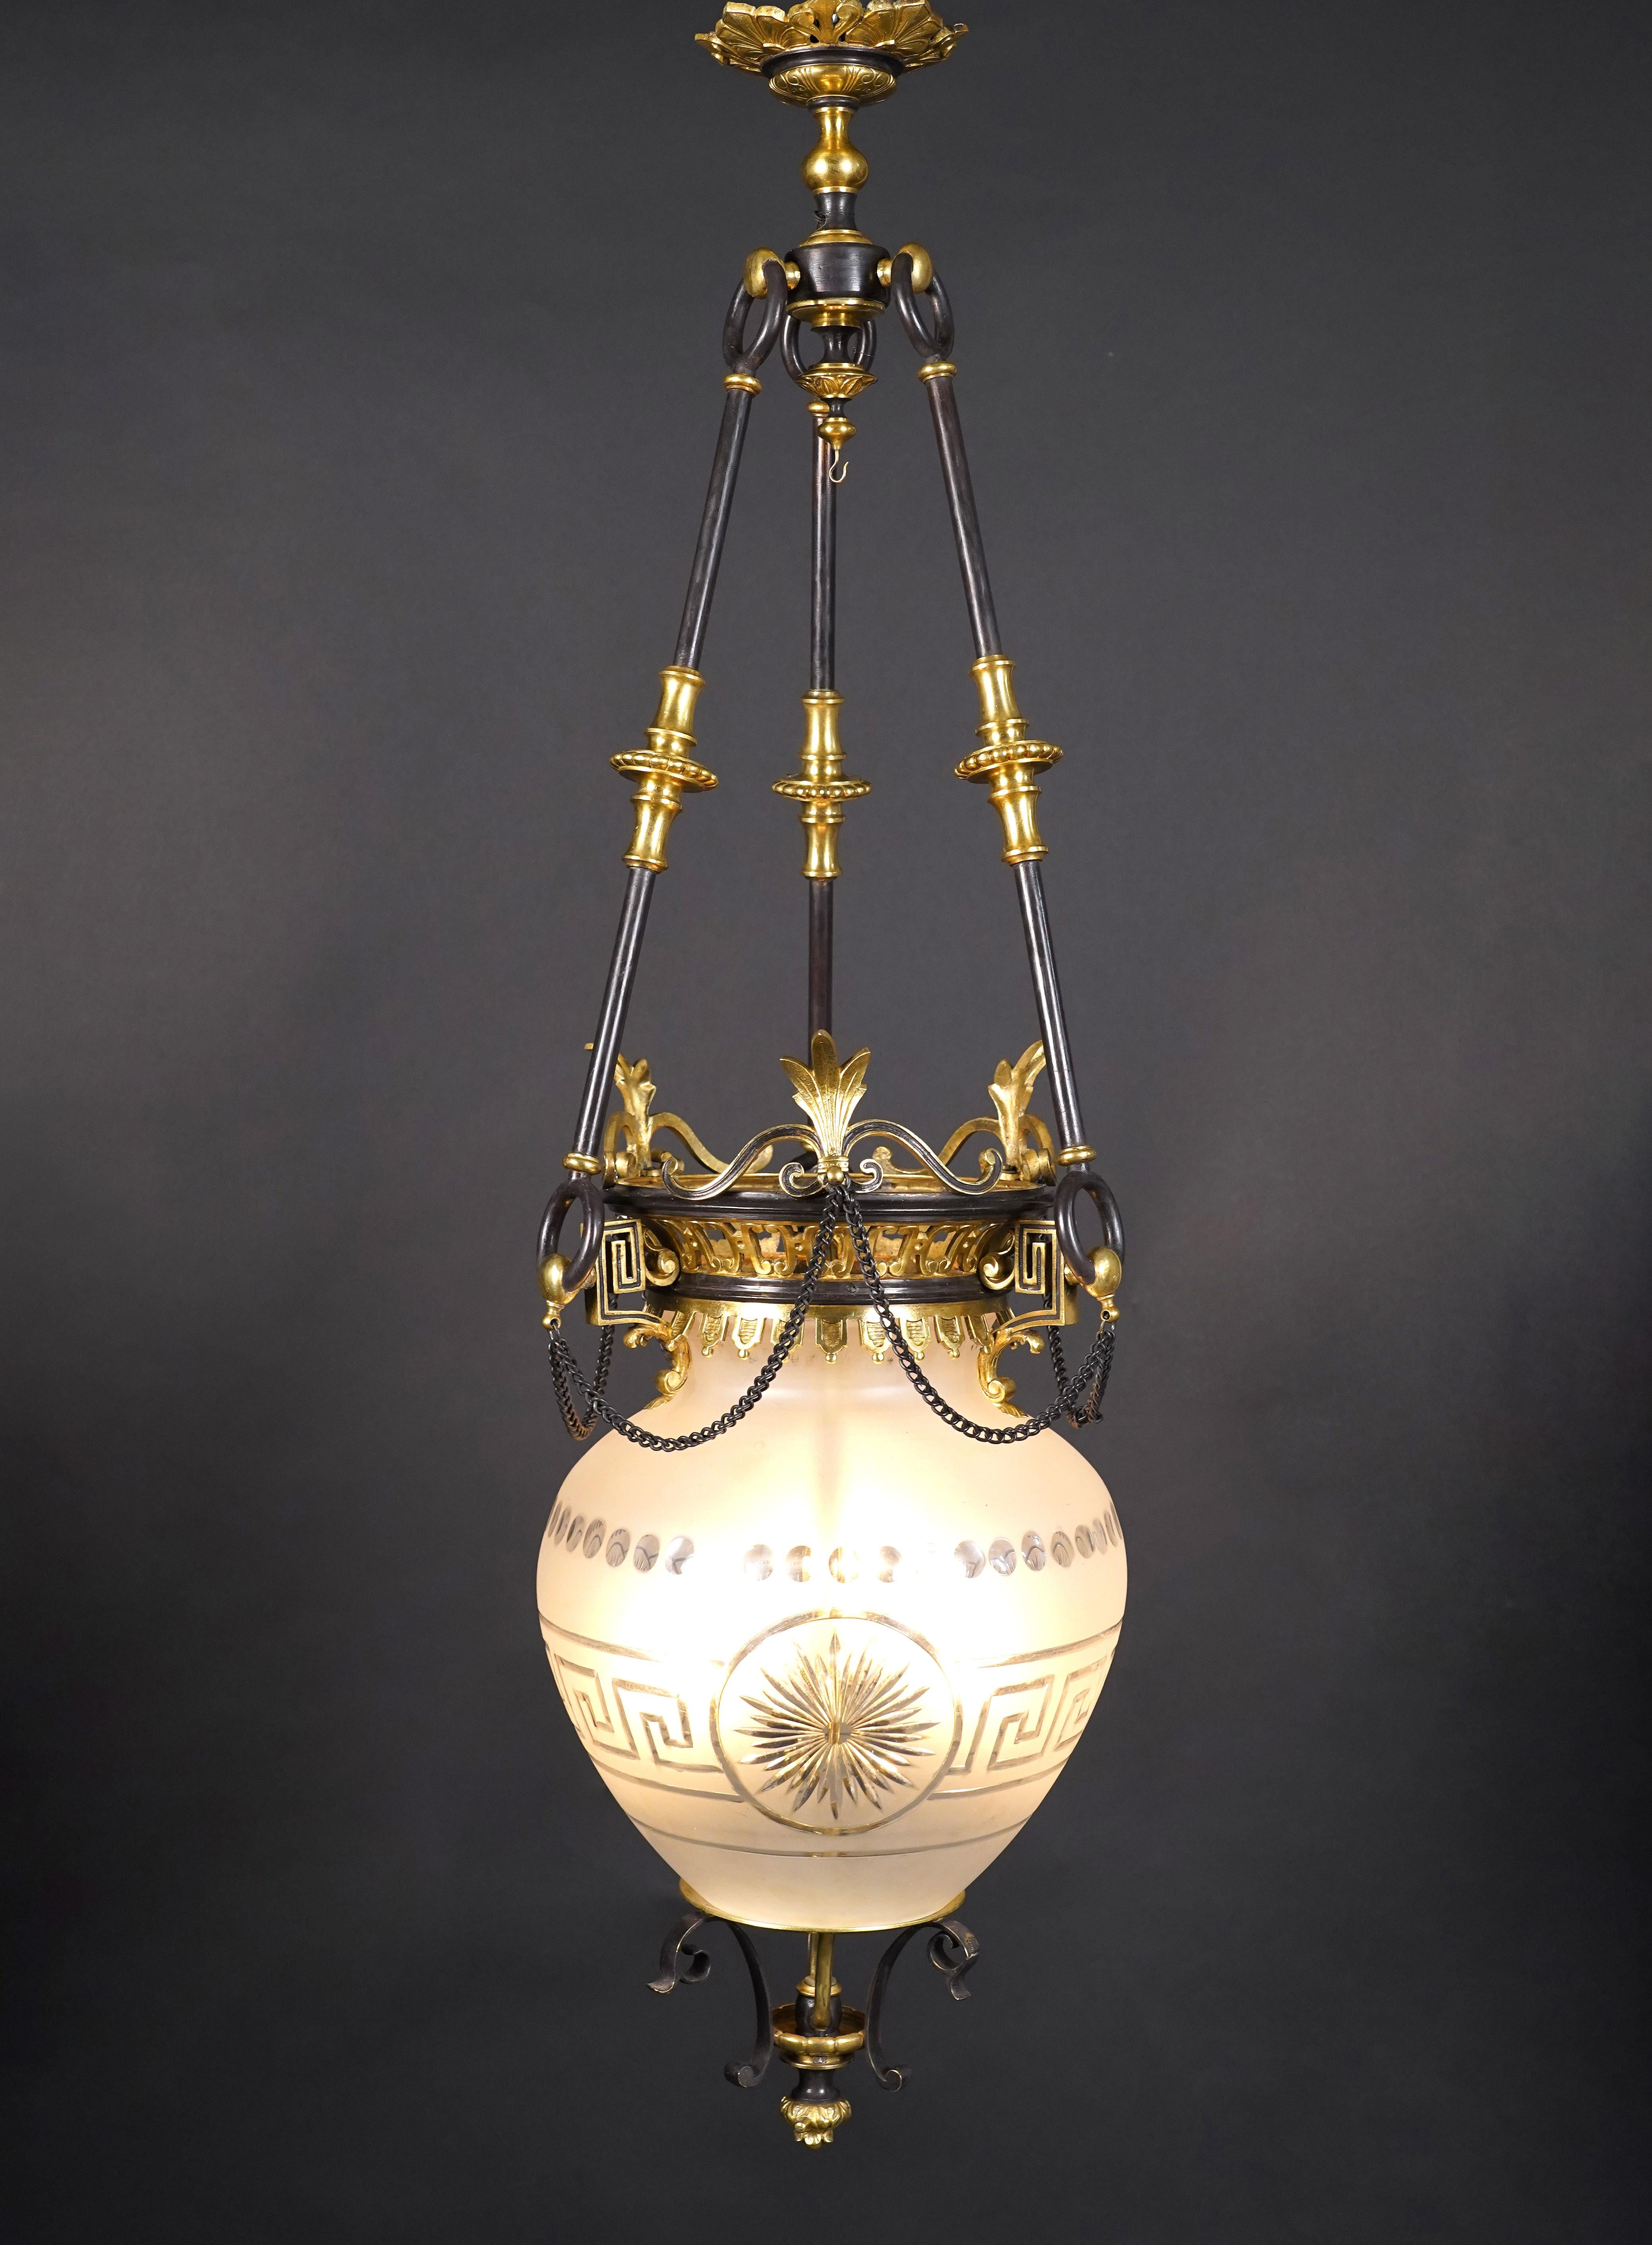 Beautiful lantern in double patina bronze and crystal. The central shaft is engraved with a Greek frieze centered on a star. The whole is suspended from a openwork crown decorated with stylized leaves, from which three uprights end in a ceiling